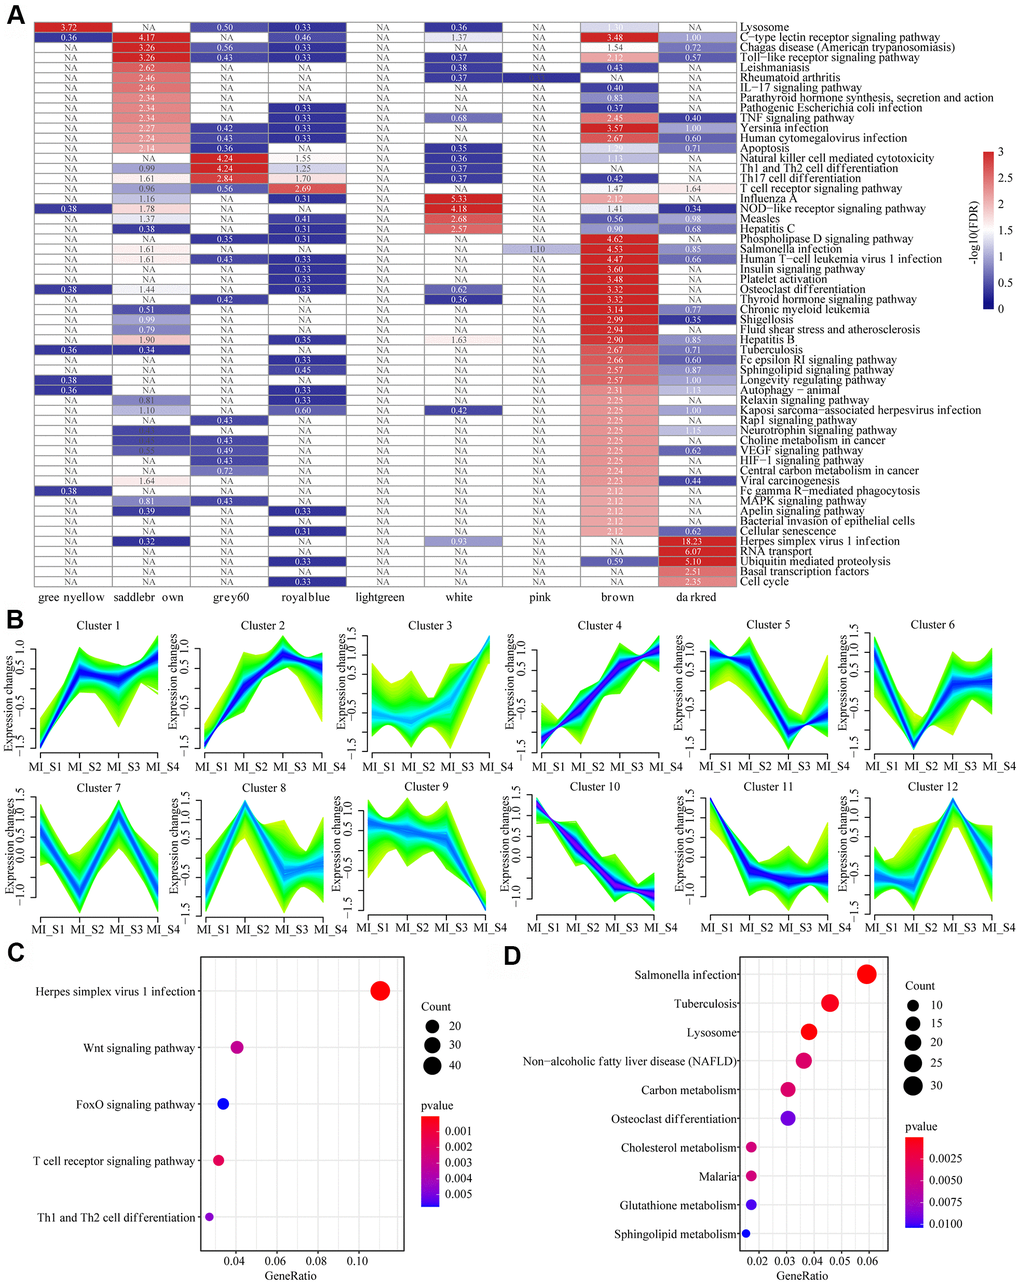 Functional enrichment analysis of MI related modules and timing analysis of MI gene expression. (A) Heatmap of 9 modules enriched to KEGG Pathway, color indicates log10 (FDR), NA indicates unenriched. (B) Time series analysis of 12 expression patterns of gene expression at different time points. (C) Sustained expression of elevated gene sets enriched to the KEGG pathway at different time points. (D) The KEGG pathway was enriched for a set of genes with decreased expression at different time points. The different colors indicate enrichment significance and the dot size indicates the number of enriched genes.